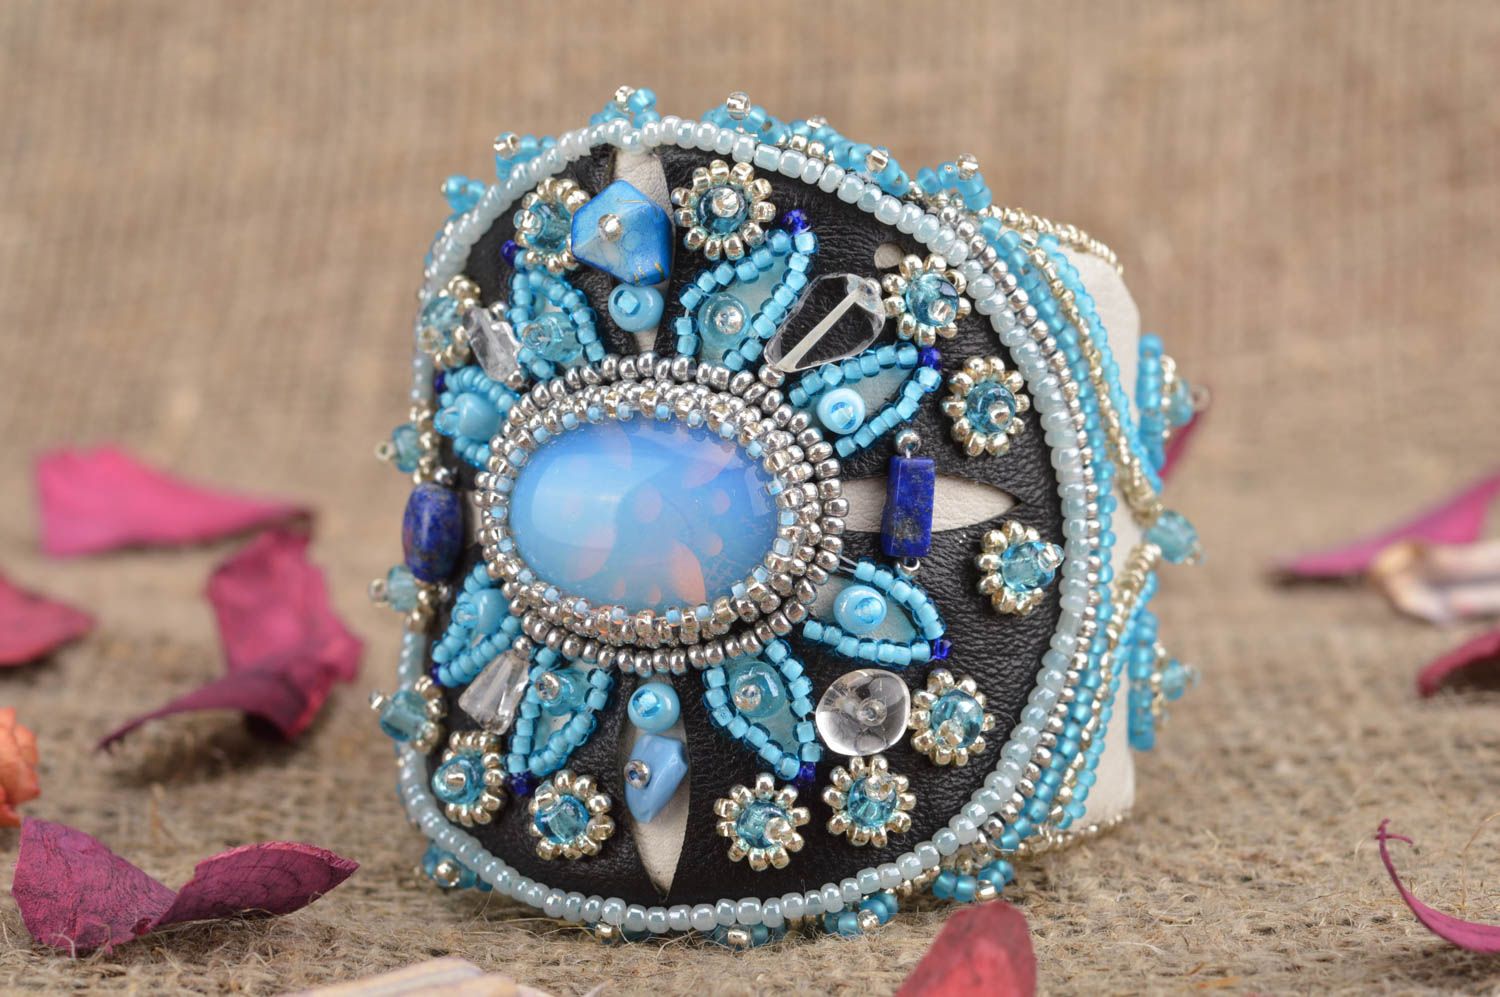 Handmade designer leather wrist bracelet embroidered with beads and moonstone photo 1